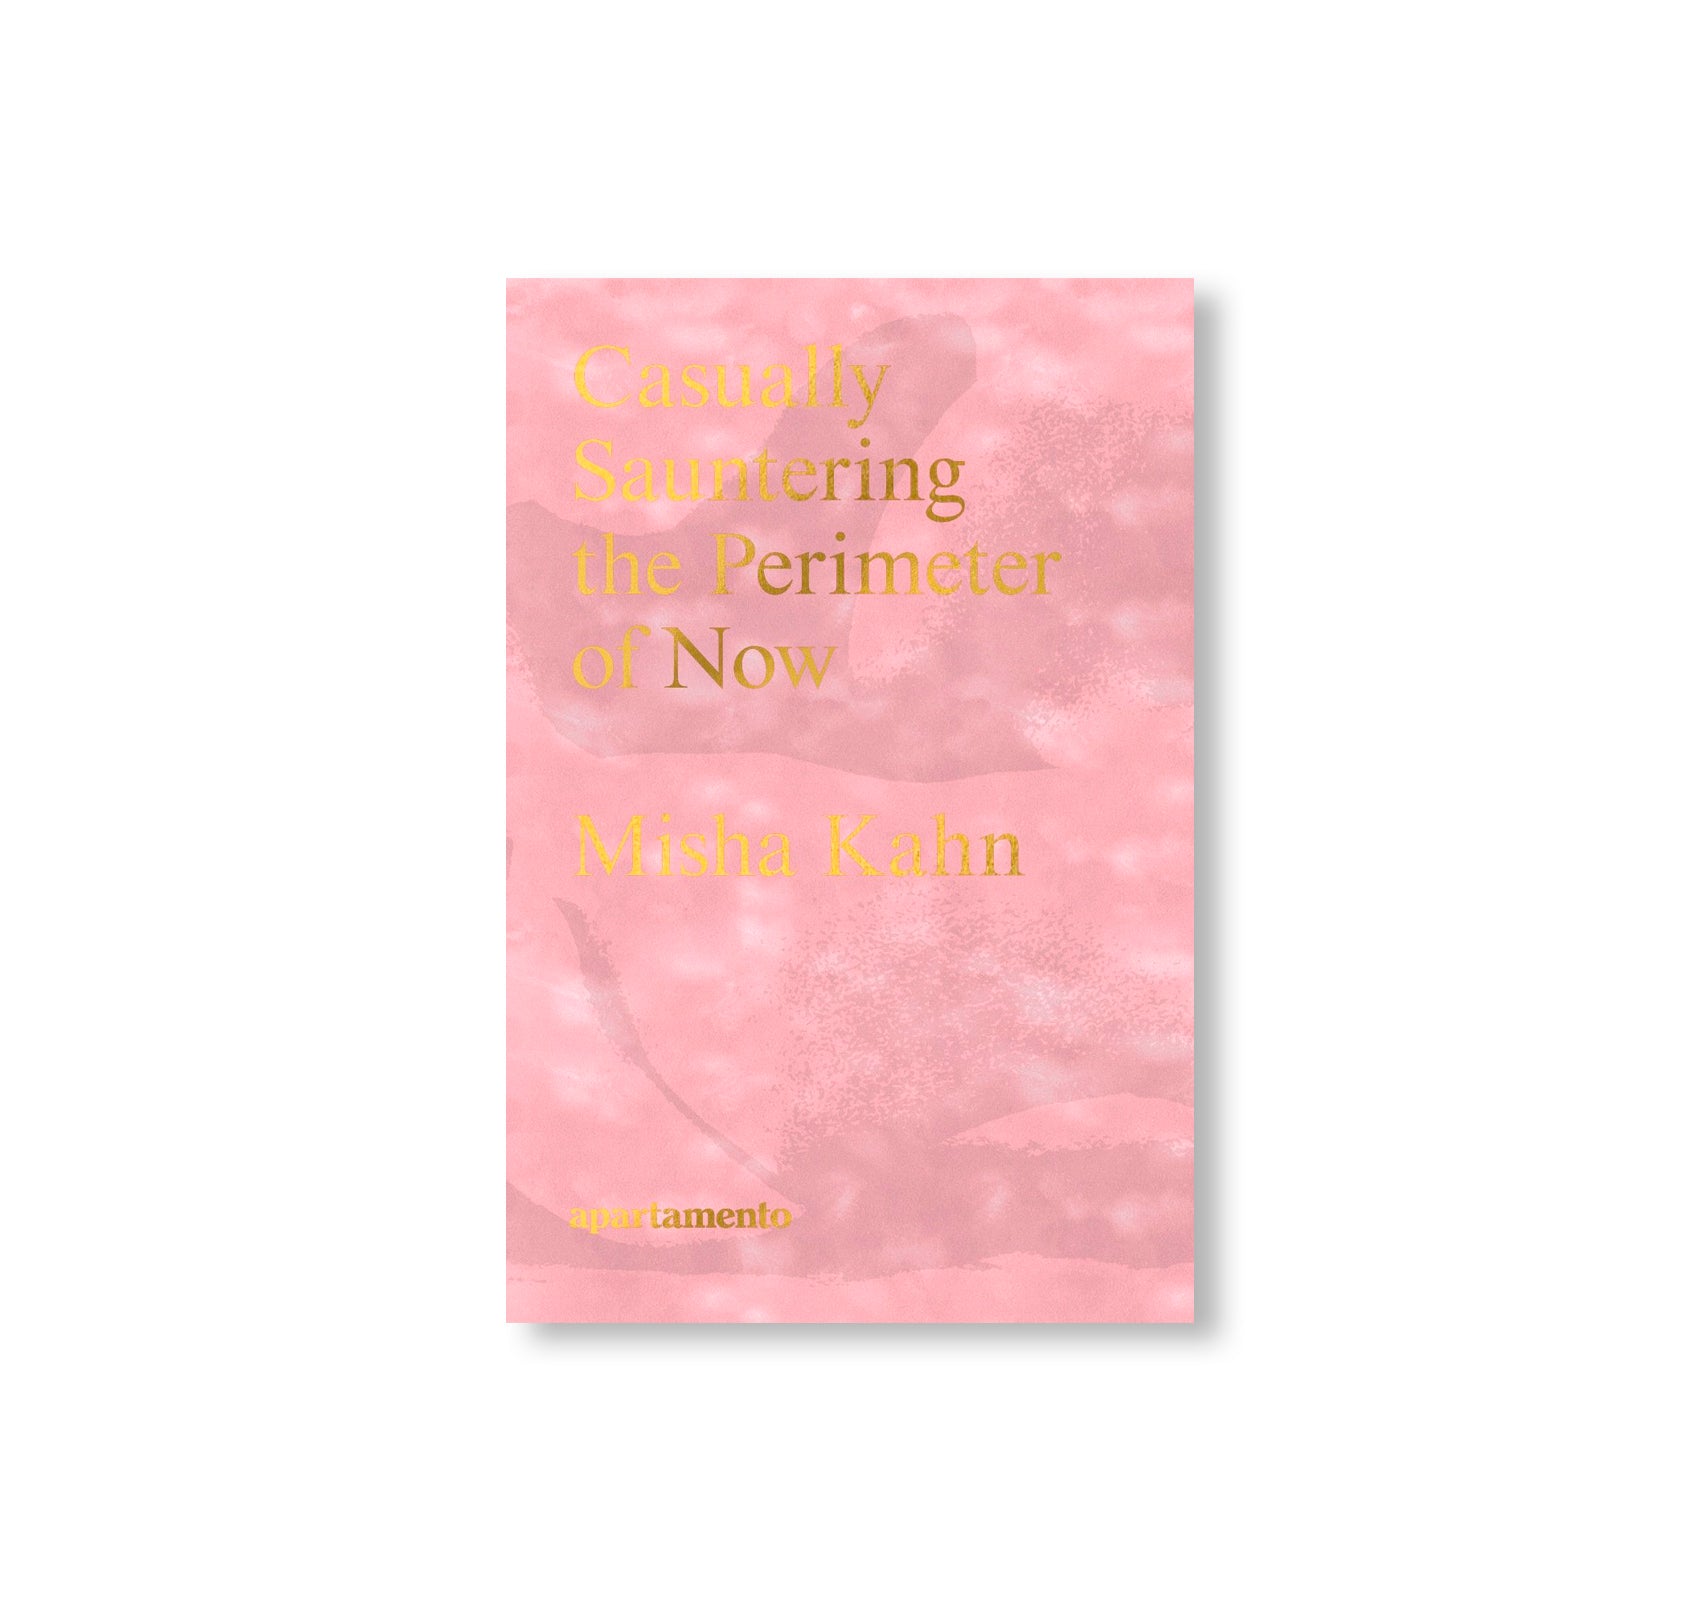 CASUALLY SAUNTERING THE PERIMETER OF NOW by Misha Kahn